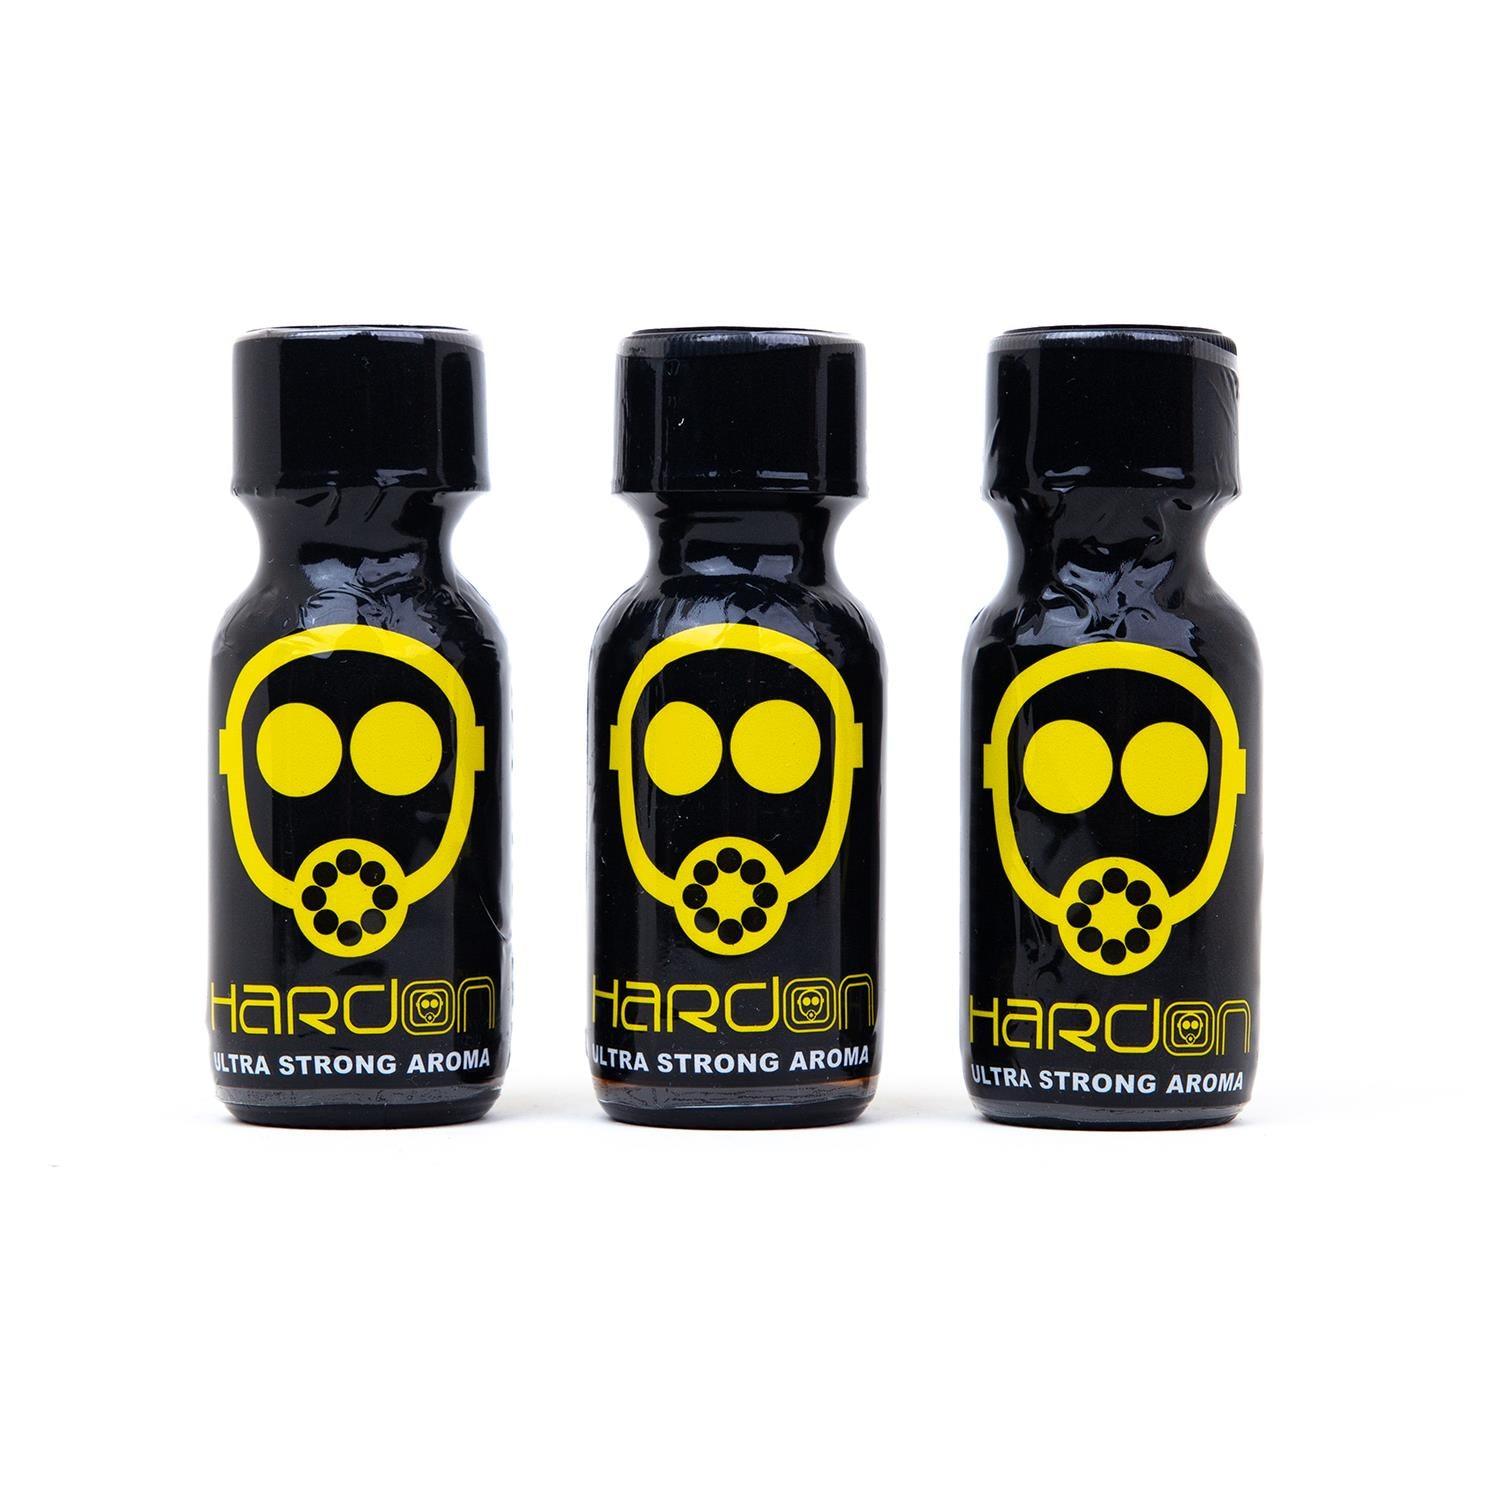 Hard On, 25ml, 3-Pack by Hard On Poppers